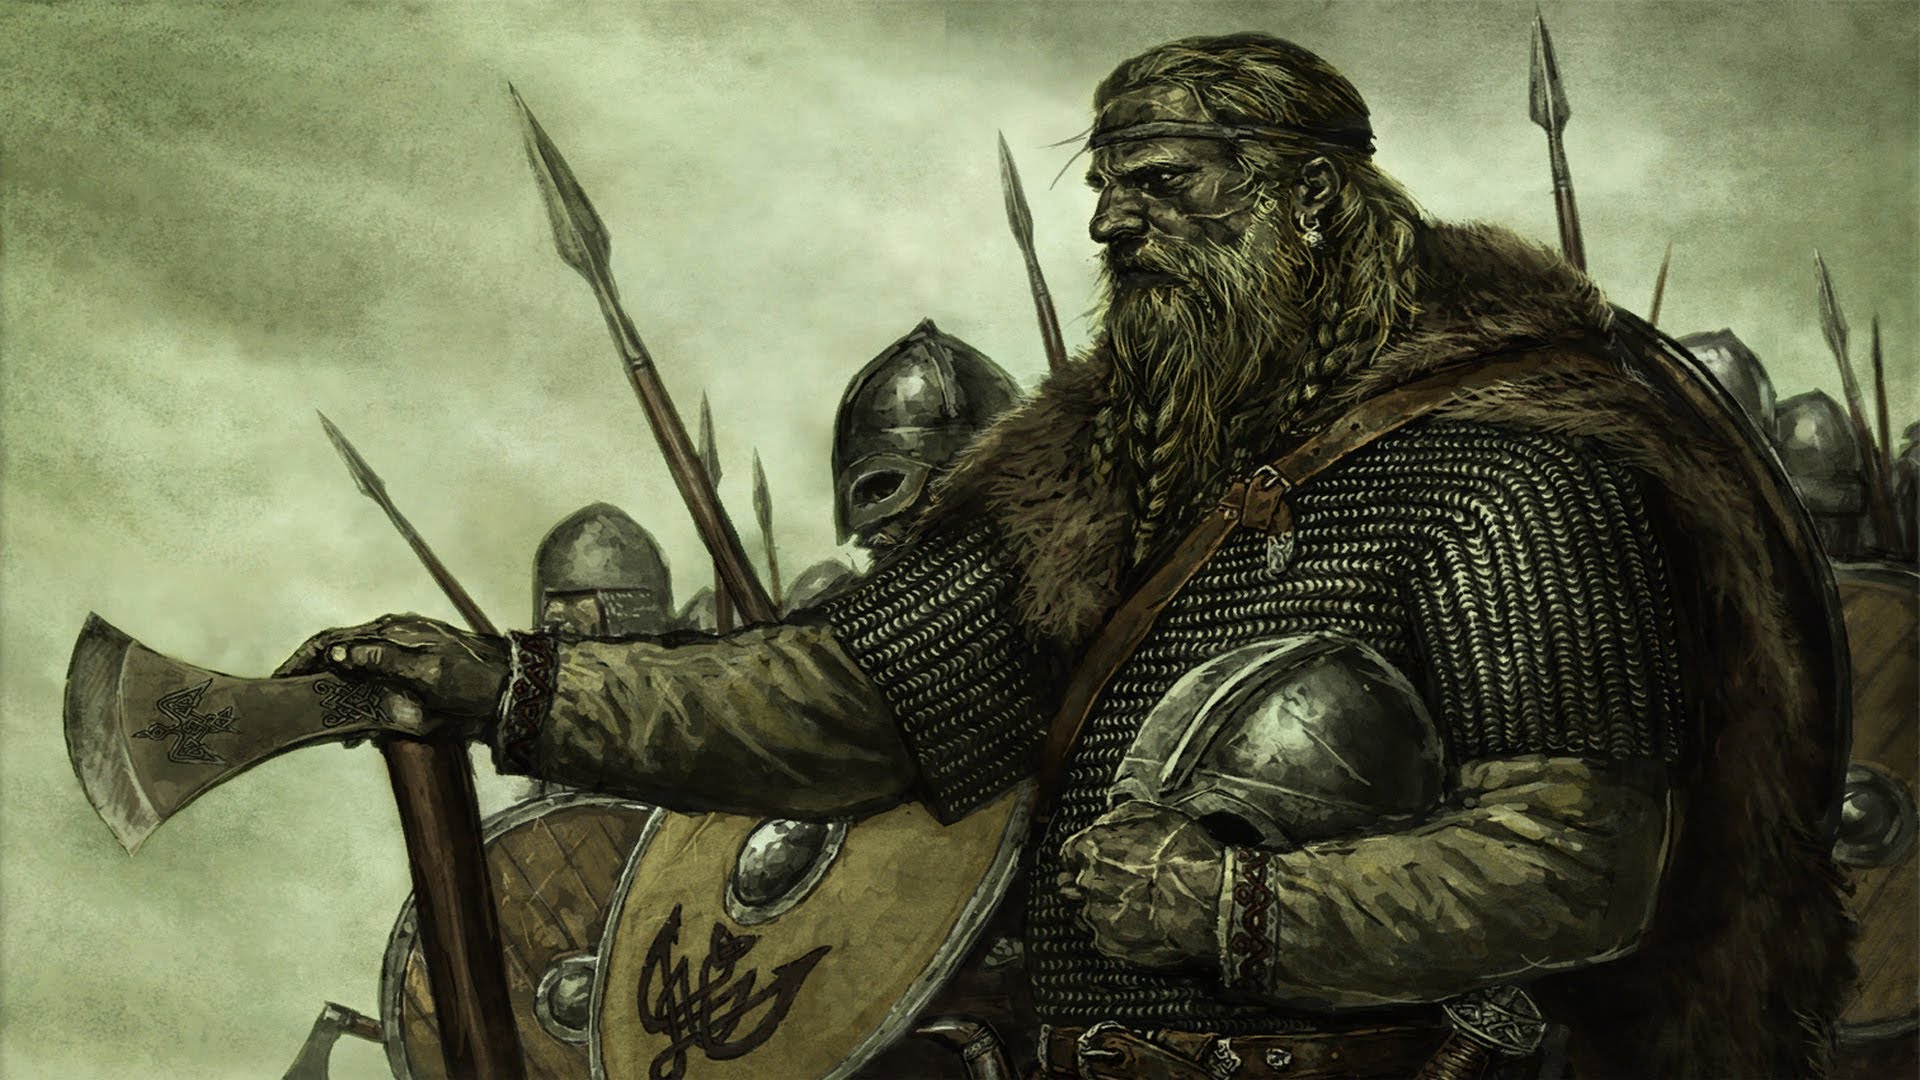 HQ Mount & Blade Wallpapers | File 325.71Kb